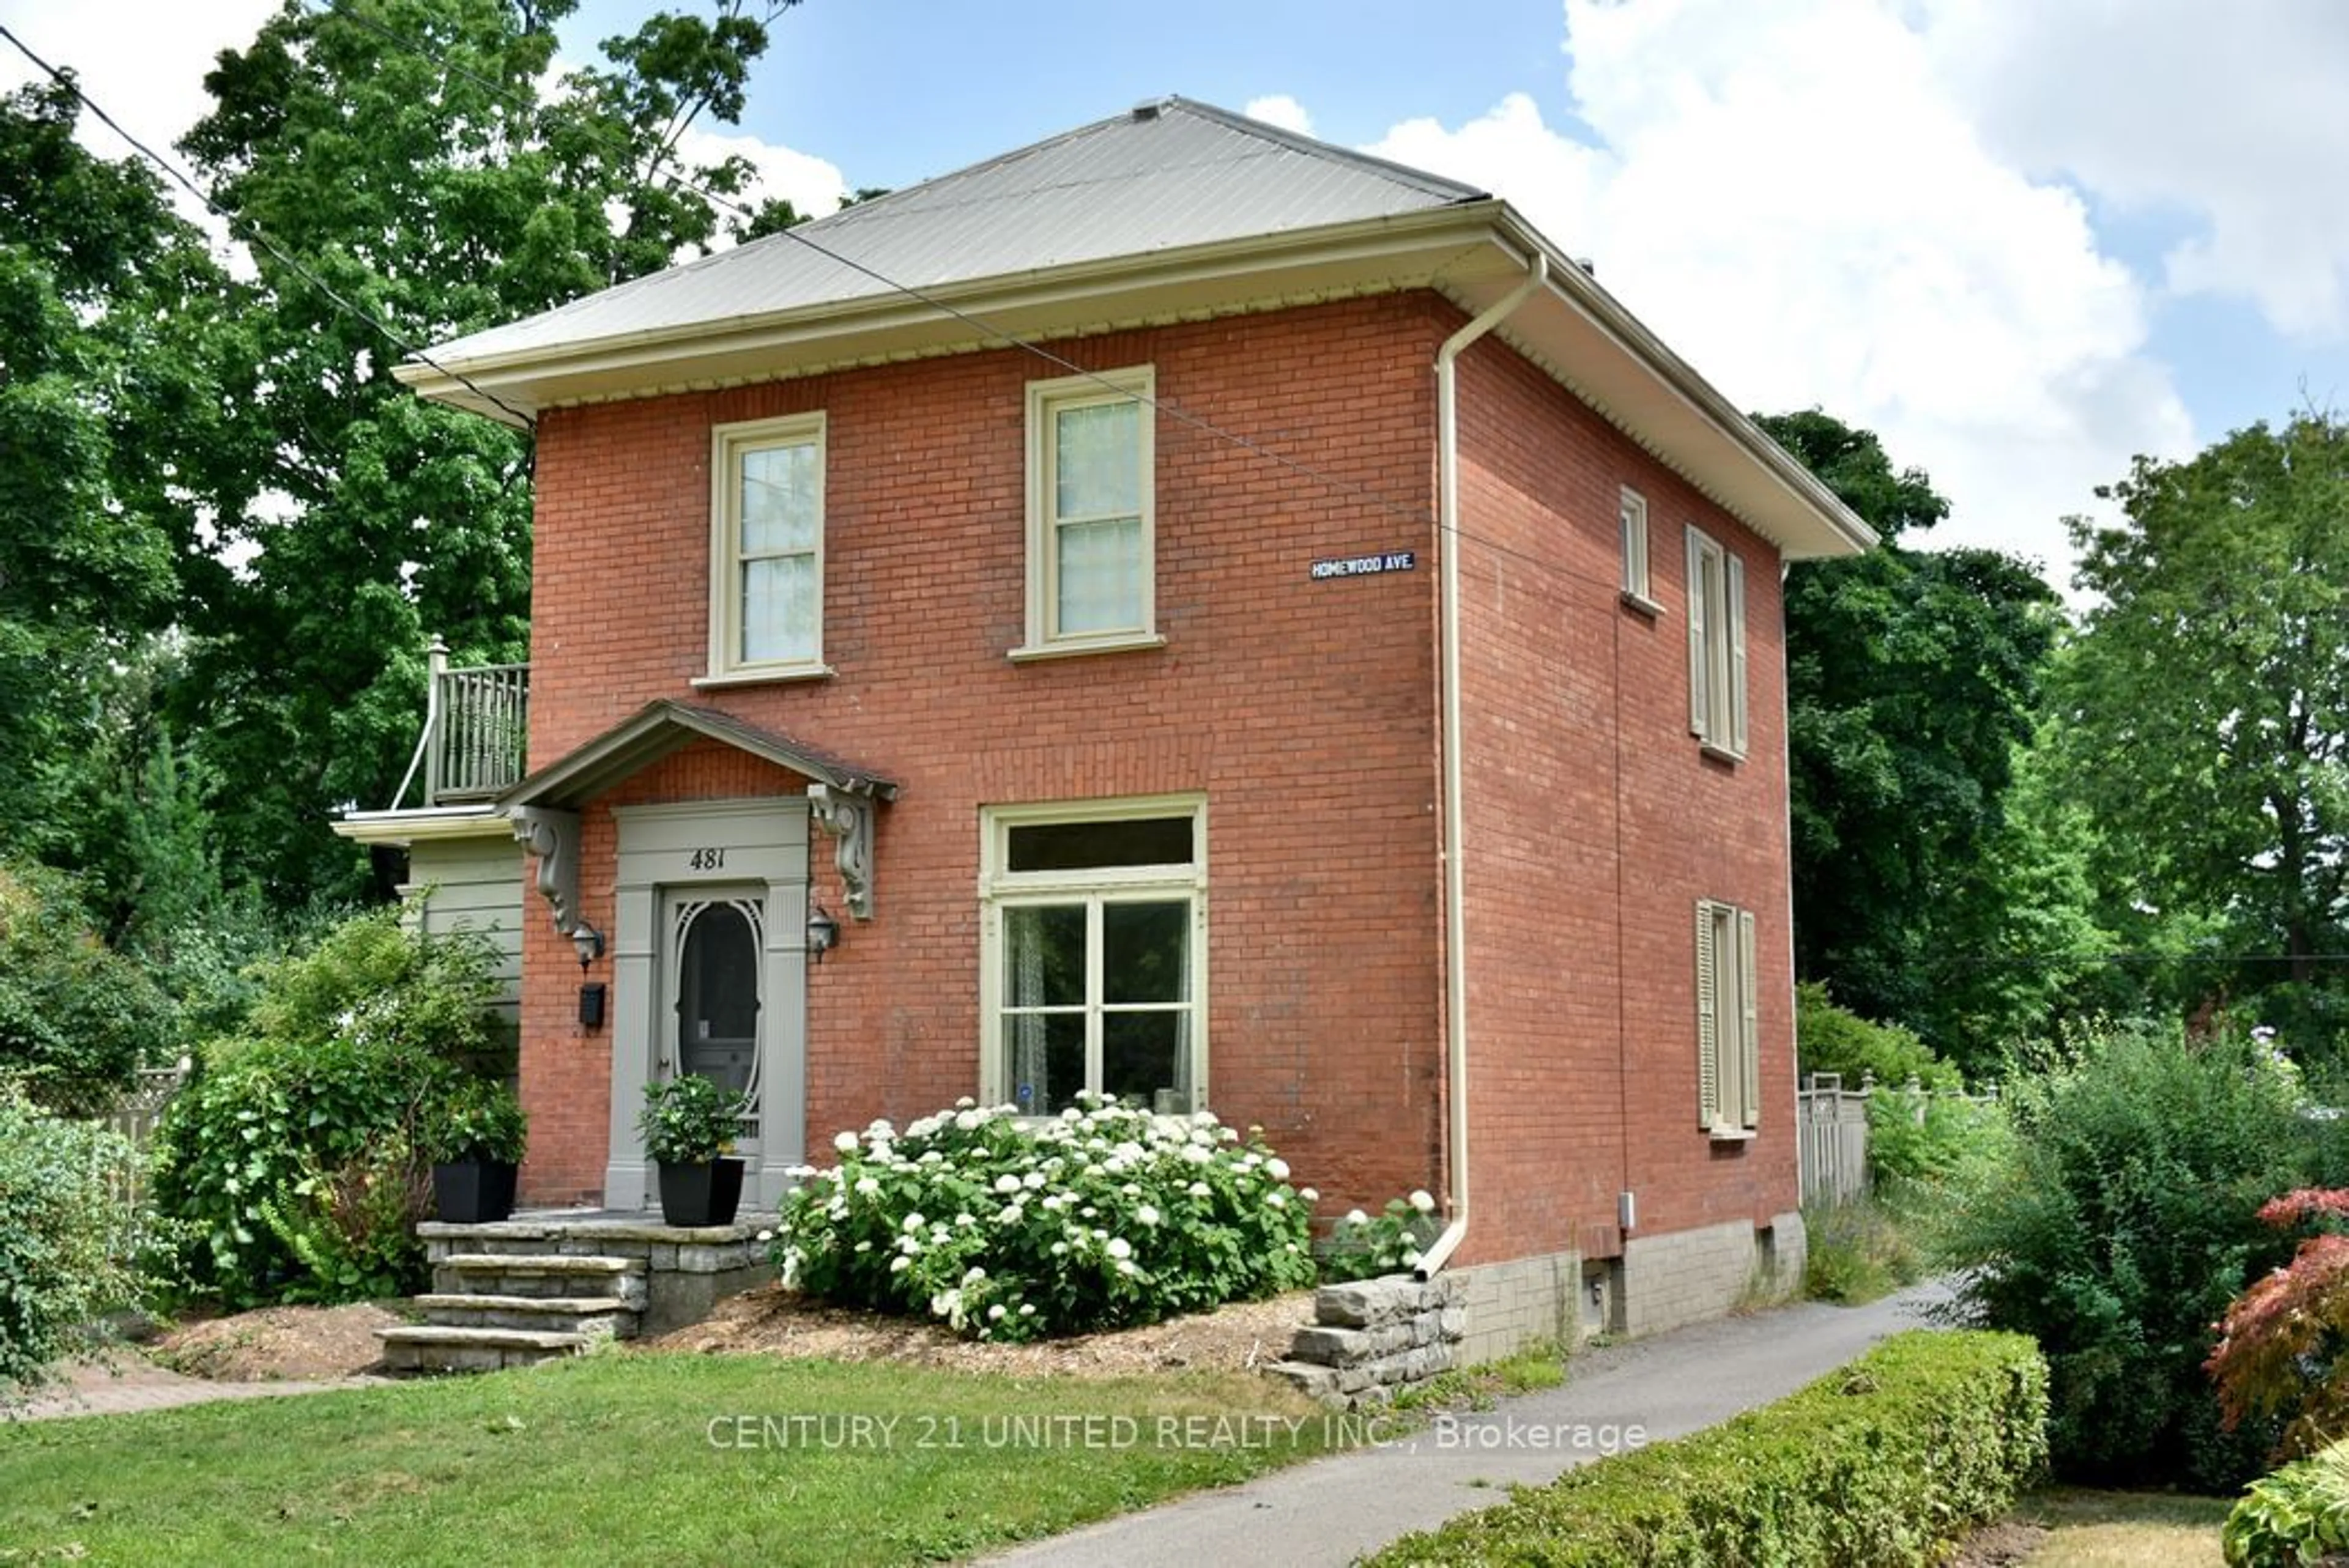 Home with brick exterior material for 481 Homewood Ave, Peterborough Ontario K9H 2N2